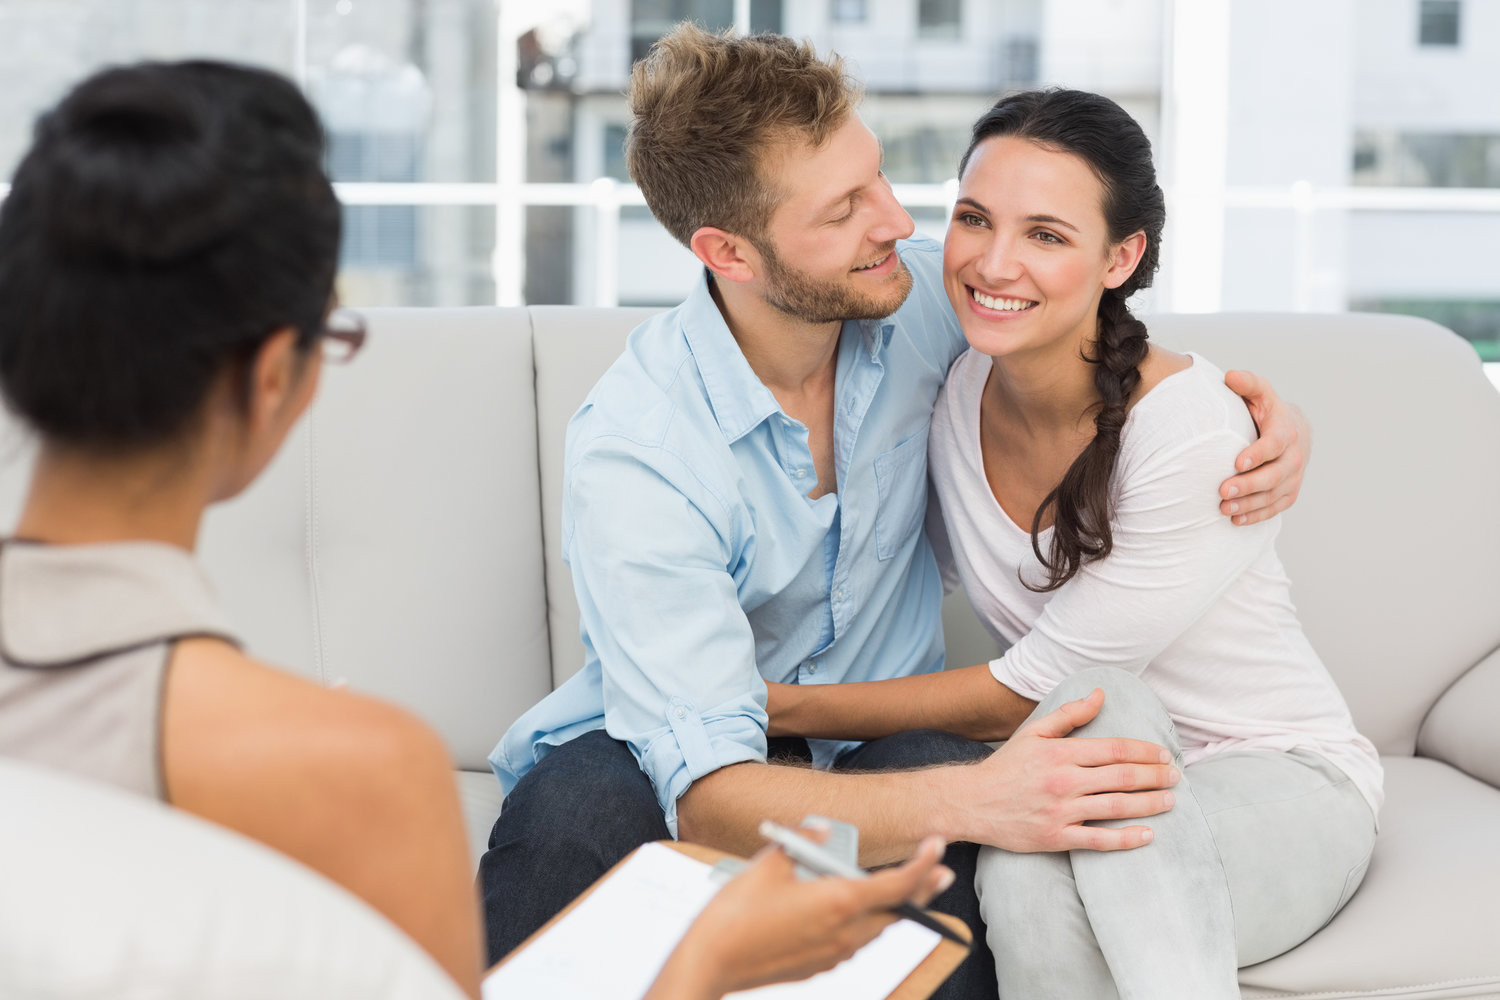 Sex Therapy For Partners — The Leading Sex Therapists and Couples Counselors in San Francisco Bay Area and East Bay Over 40 Locations Available image